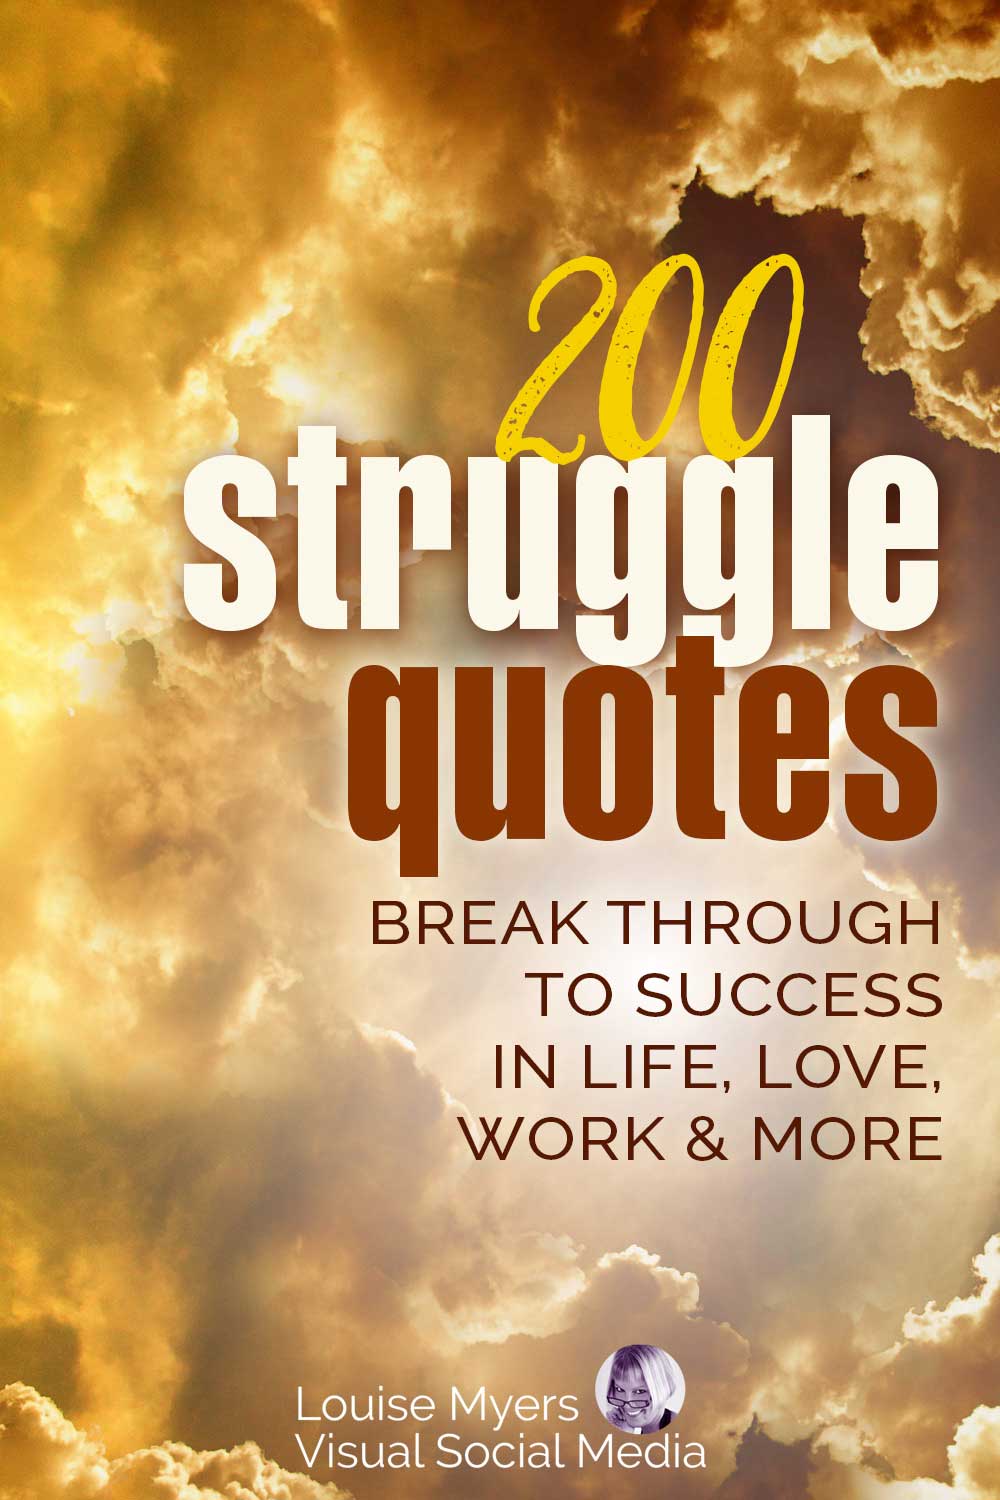 golden clouds with sun breaking through has text saying 200 struggle quotes, break through to success in life love work and more.